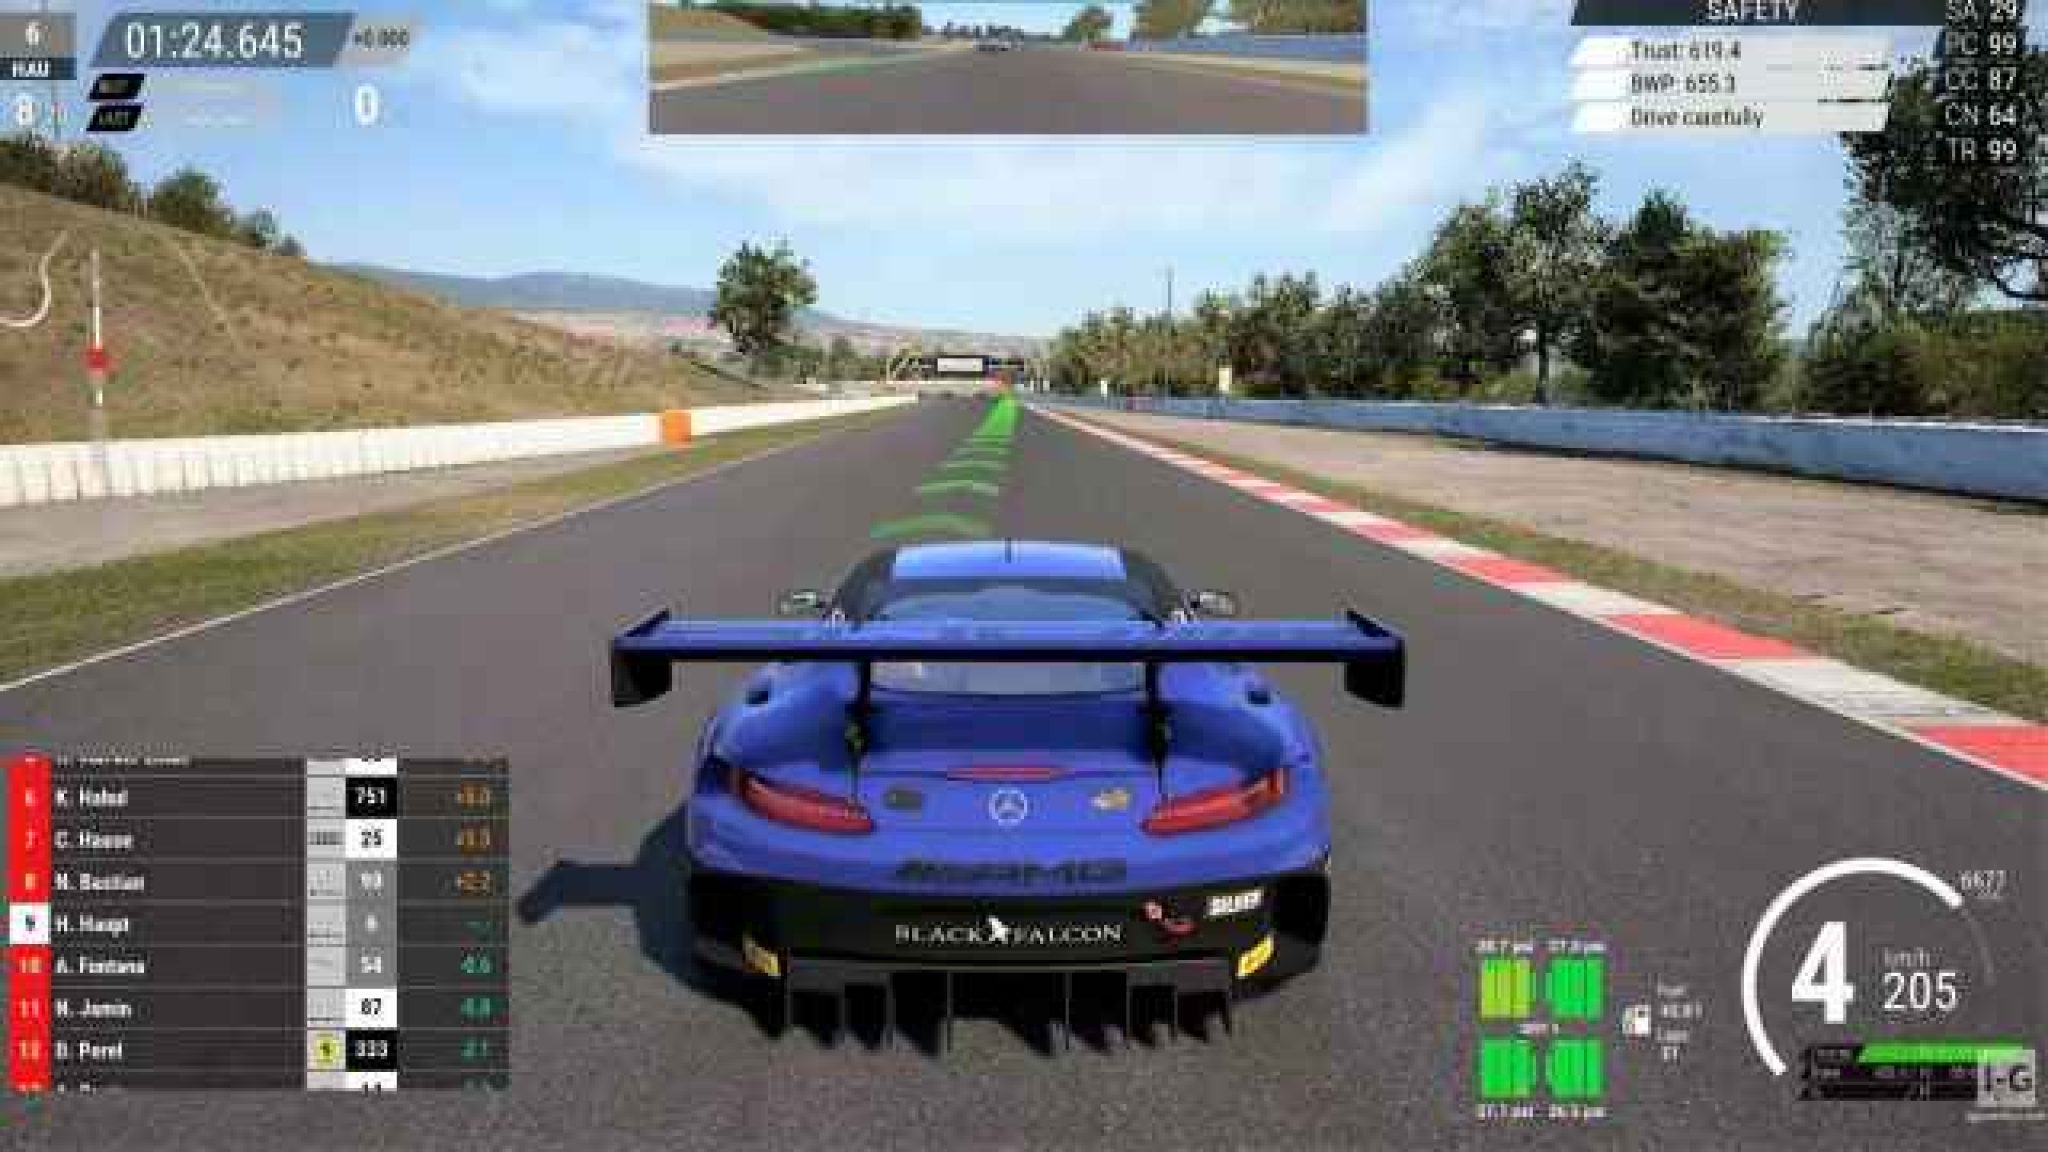 assetto corsa free download for windows 11